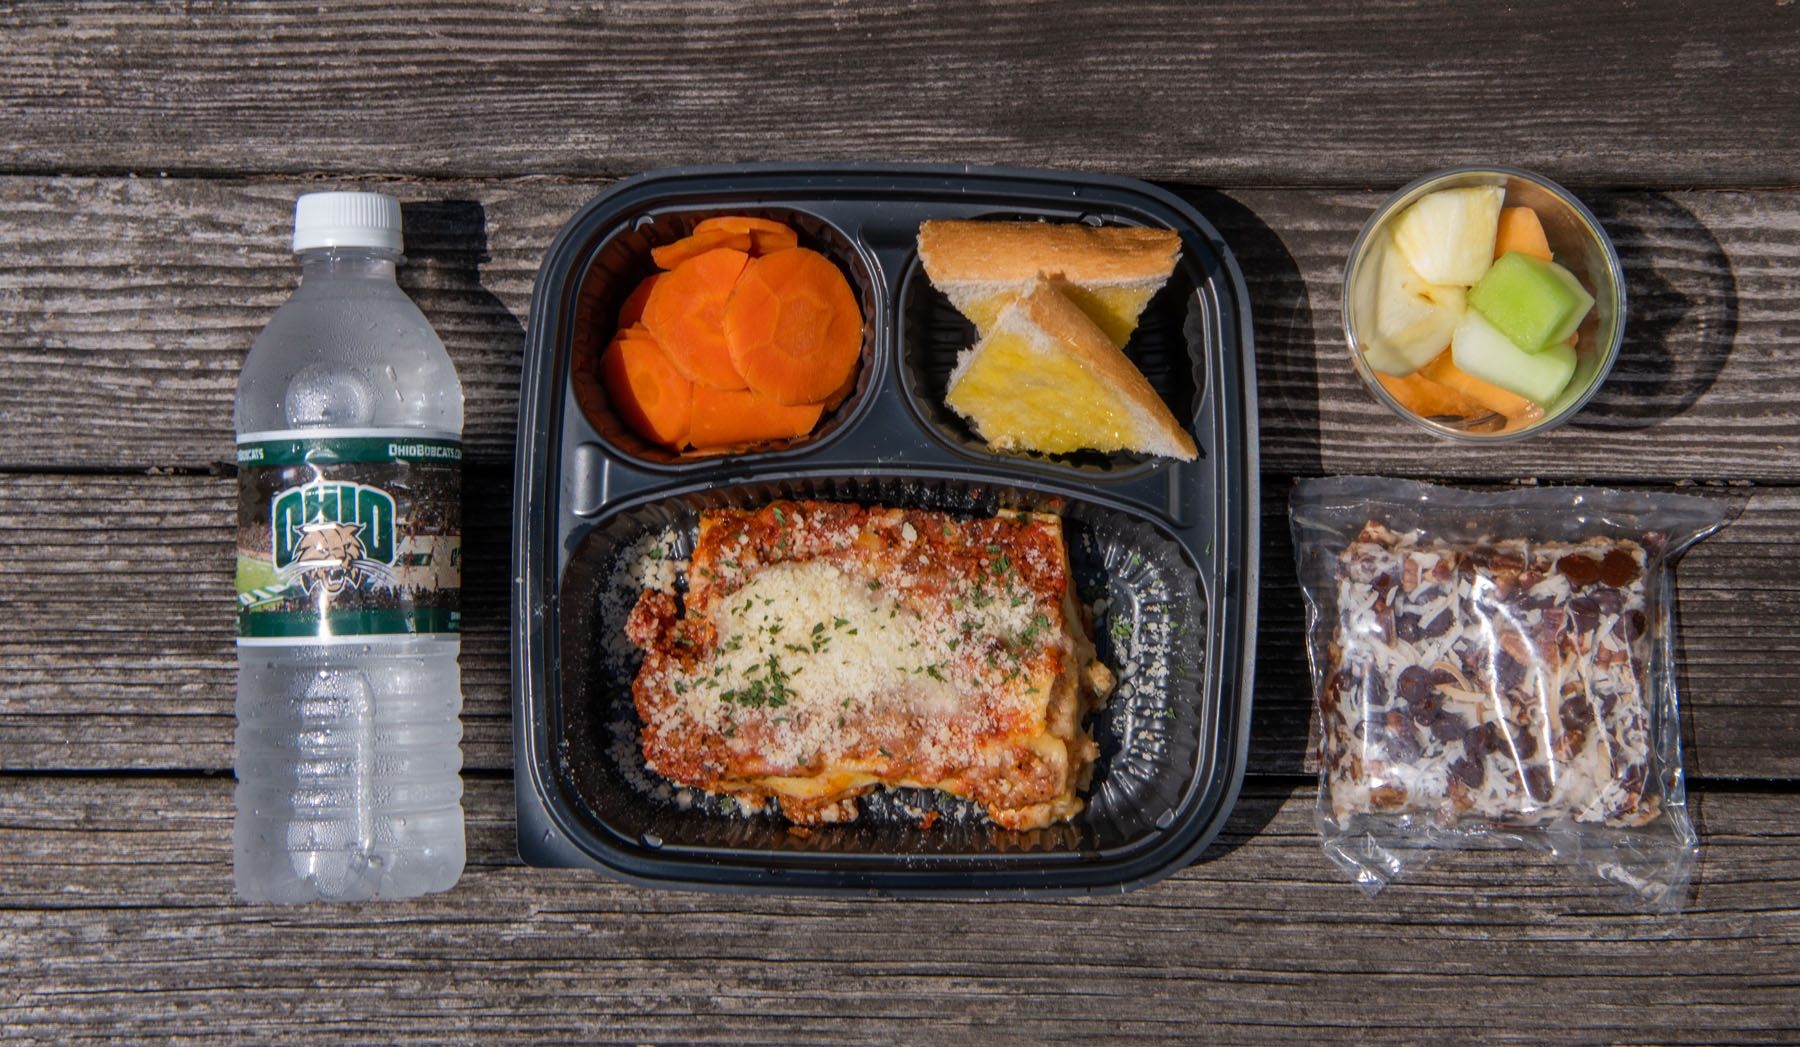 A portrait of a packaged and portioned lunch